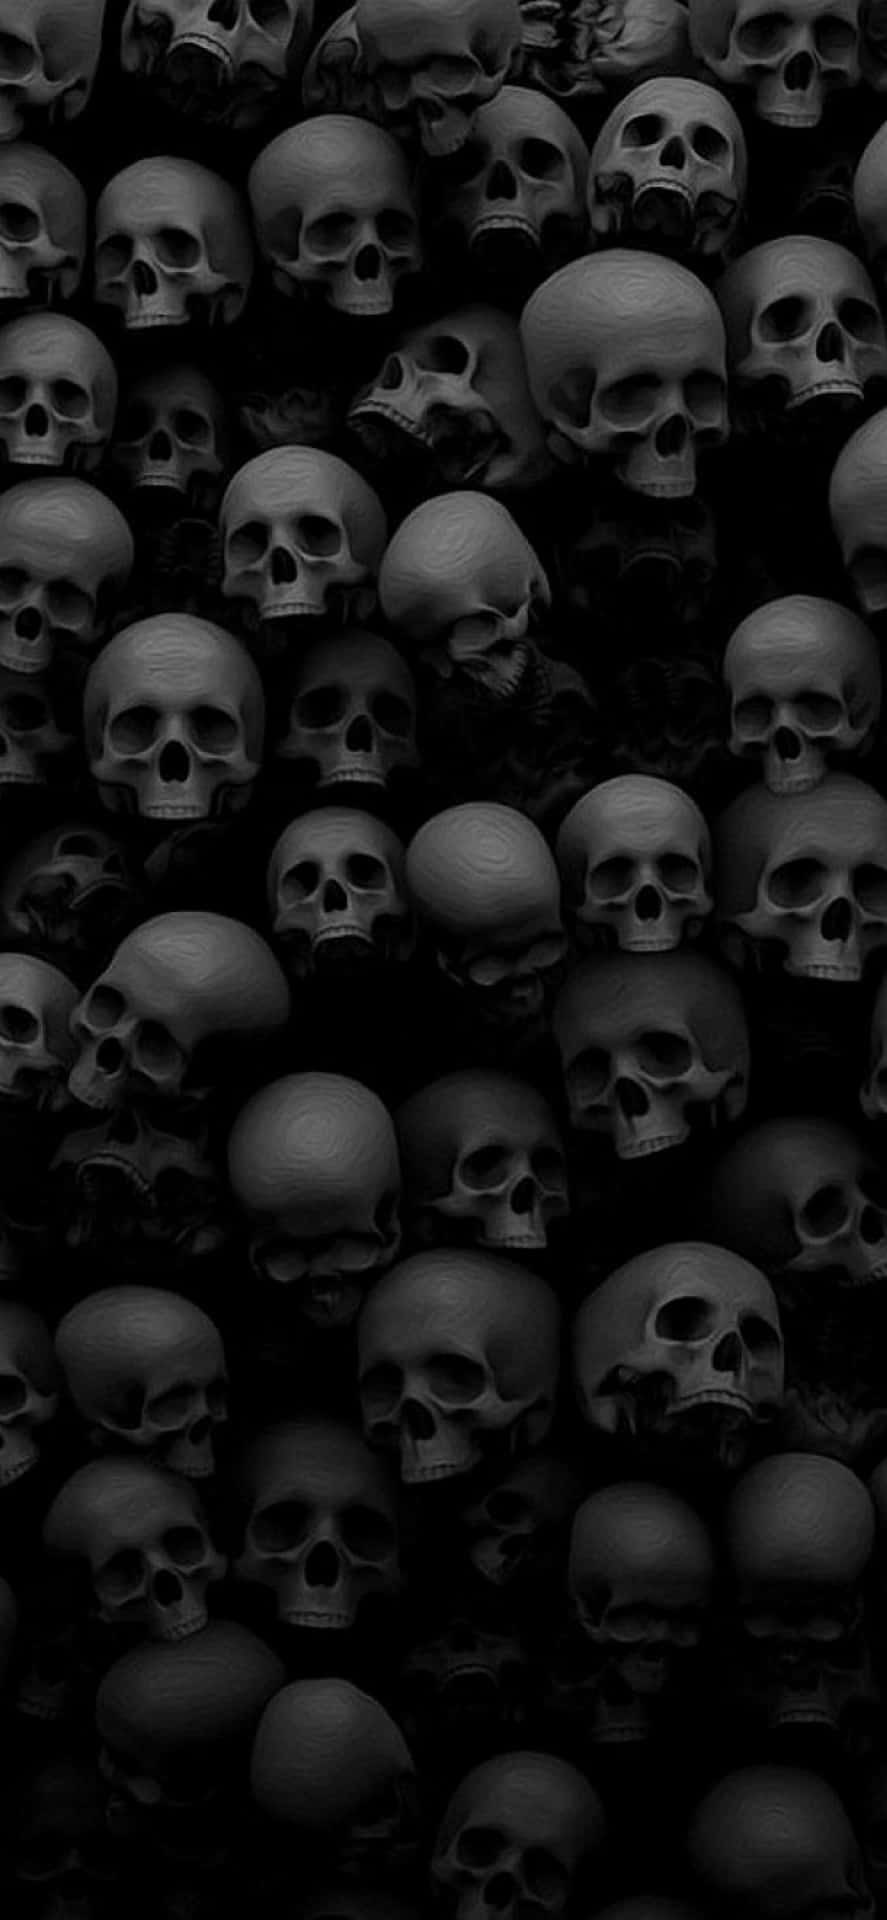 Black and white wallpaper of a wall of skulls - Horror, creepy